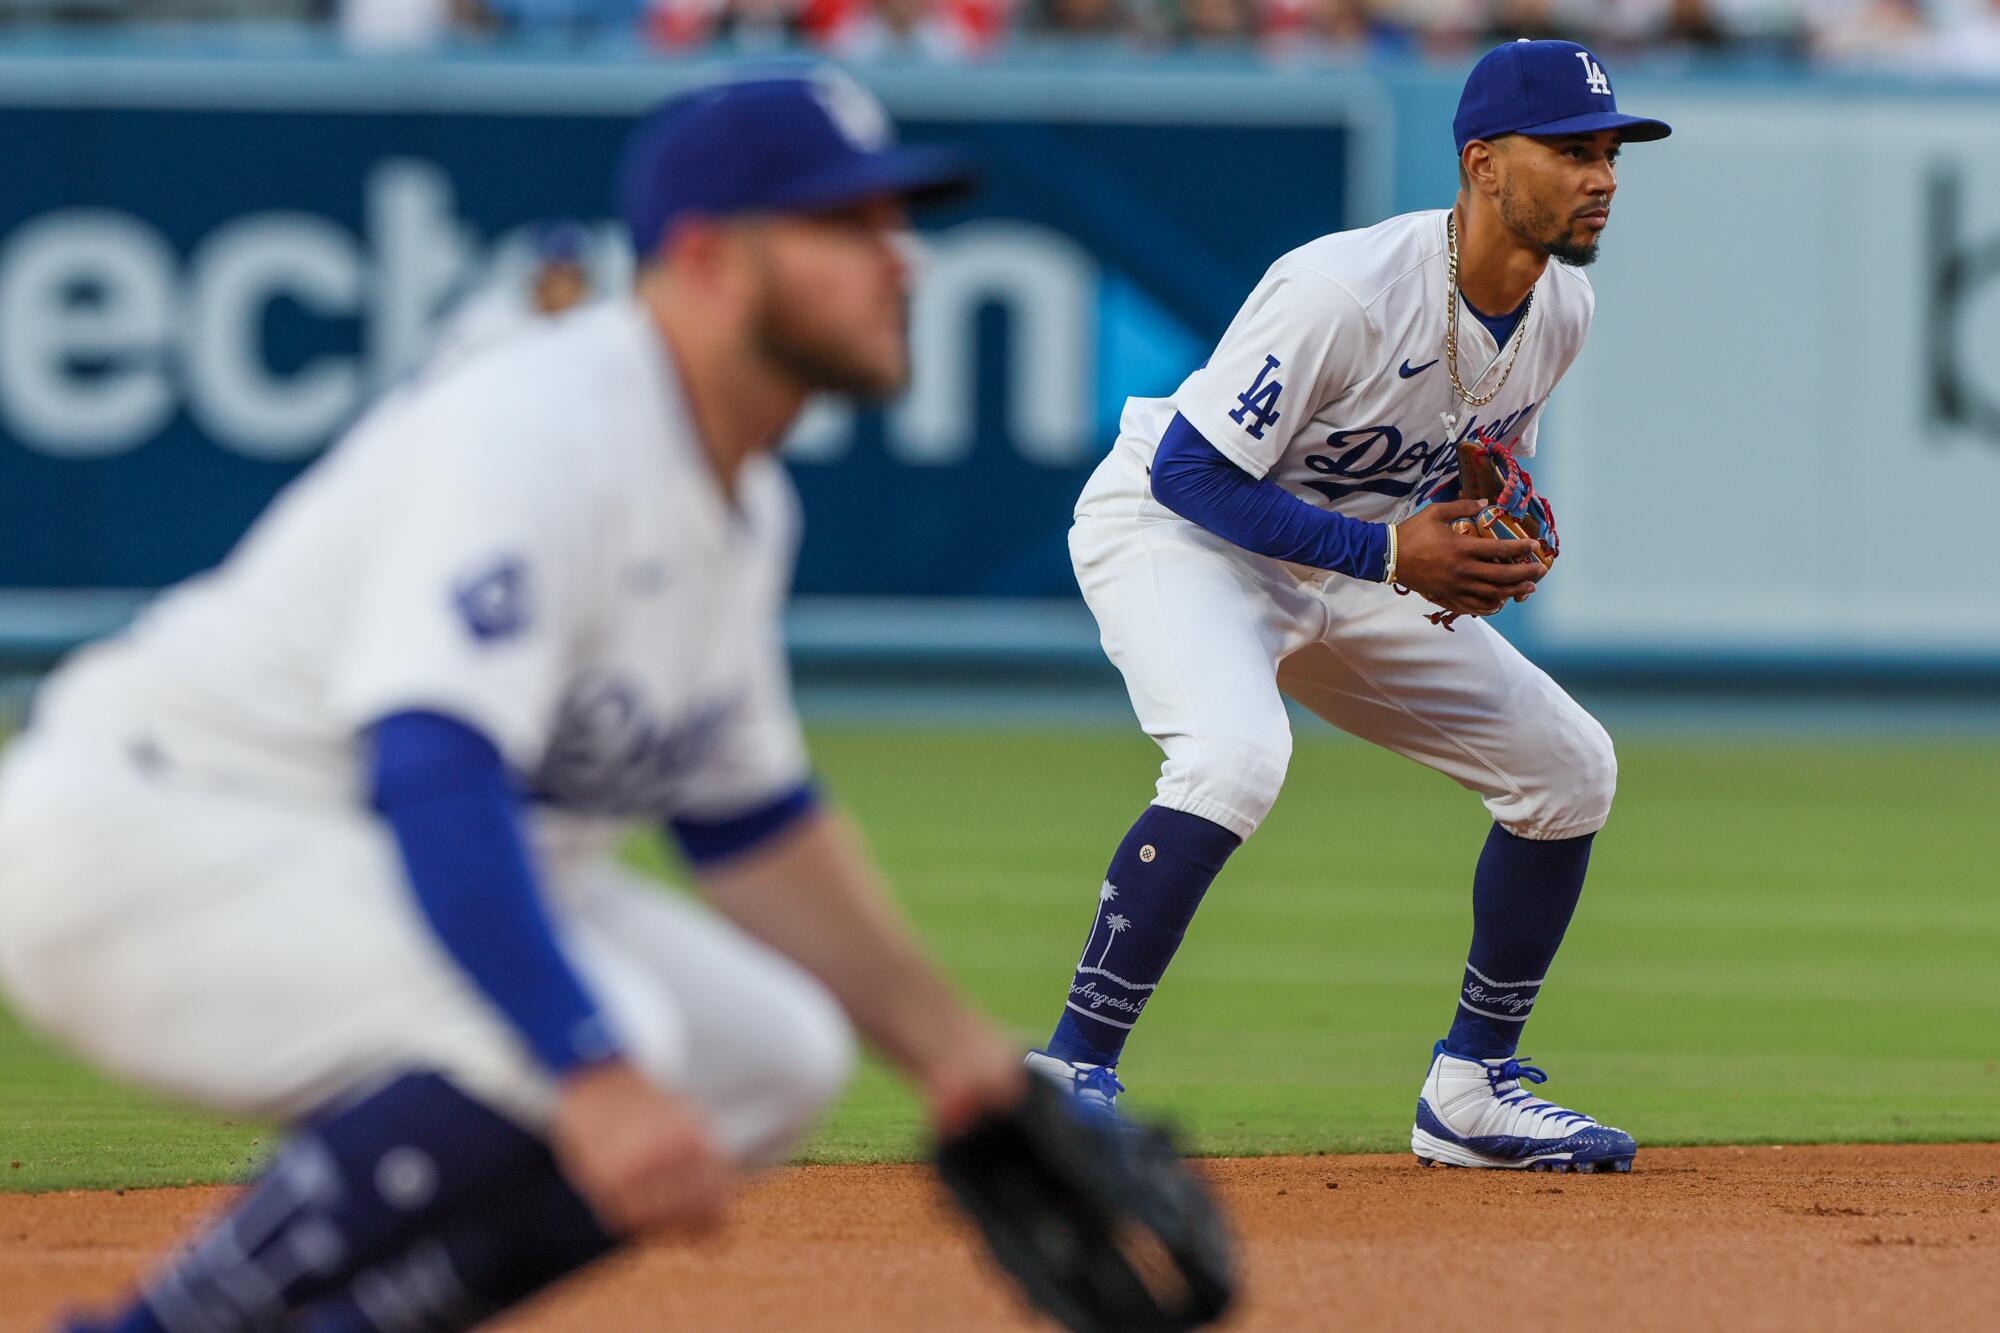 Dodgers shortstop Mookie Betts and third baseman Max Muncy crouch and lean forward before a pitch during a game.